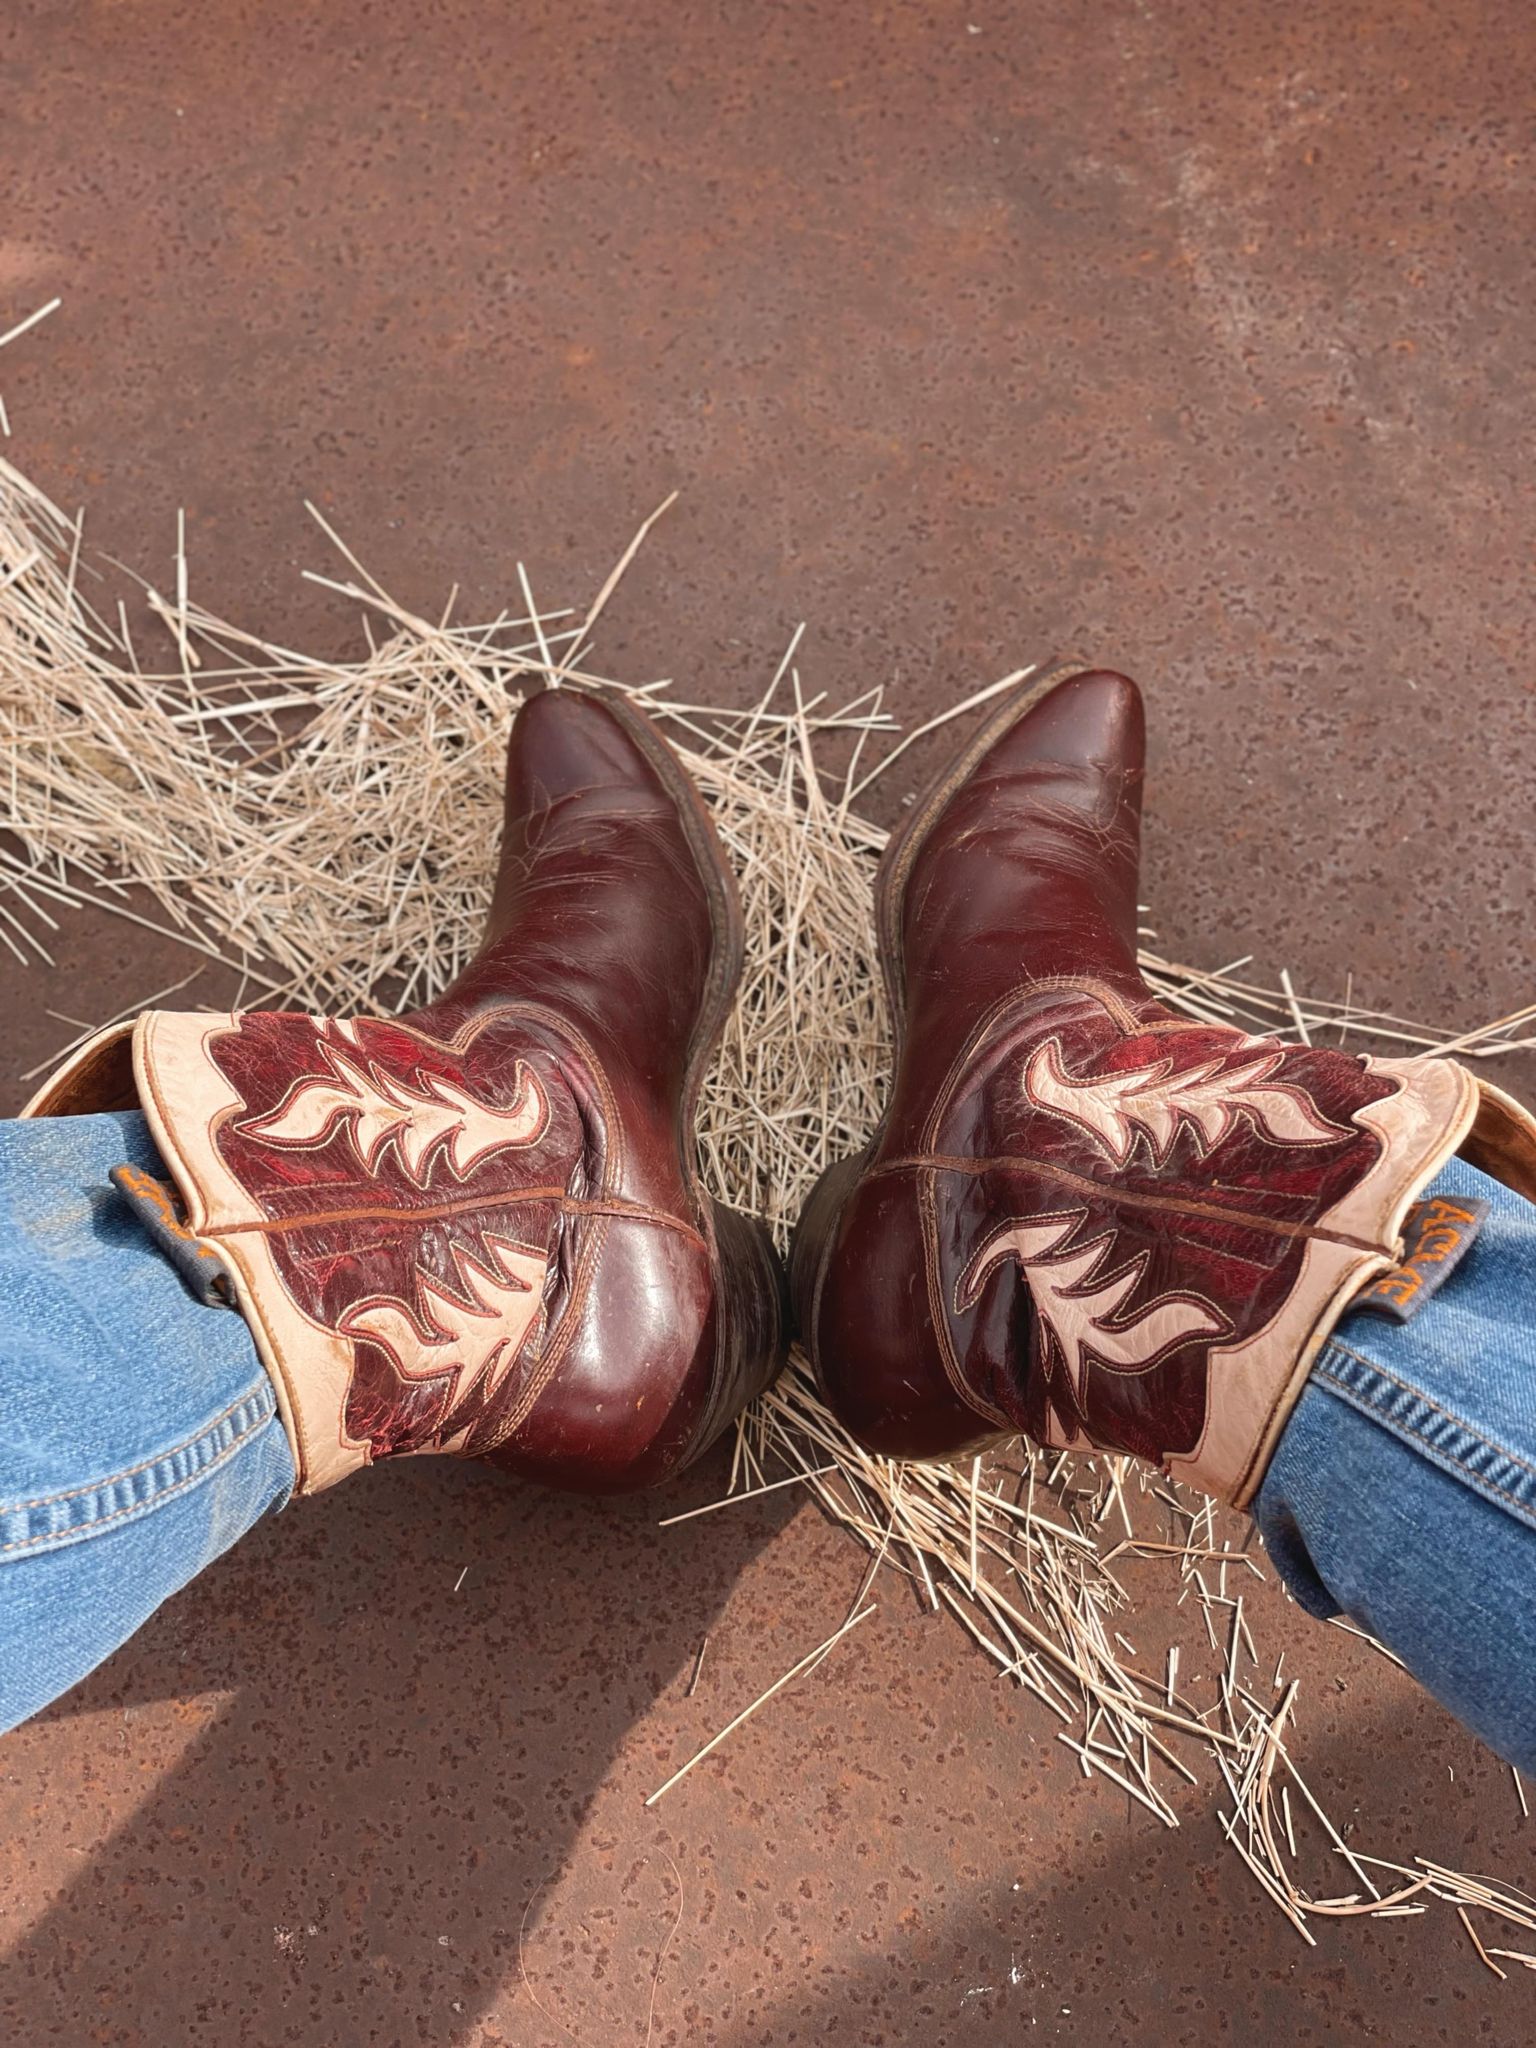 1940's Pee Wee Cowboy Boots